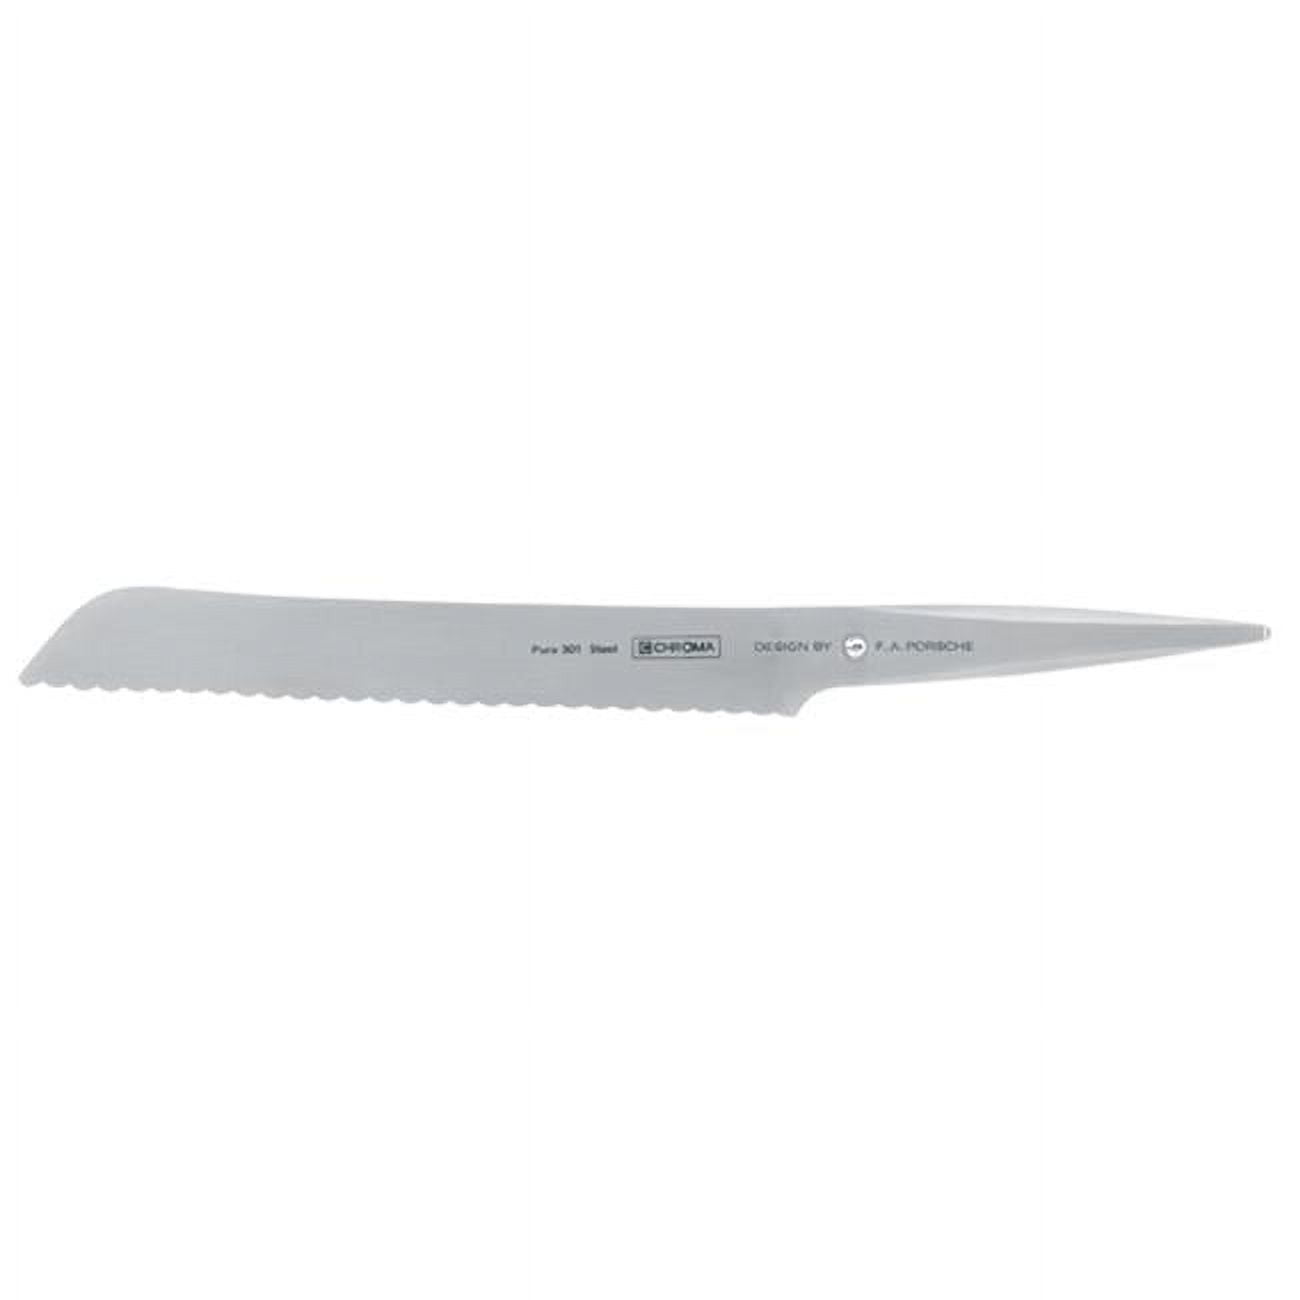 Chroma P06 Type 301 Designed By F.a. Porsche 8.5 In. Bread Knife